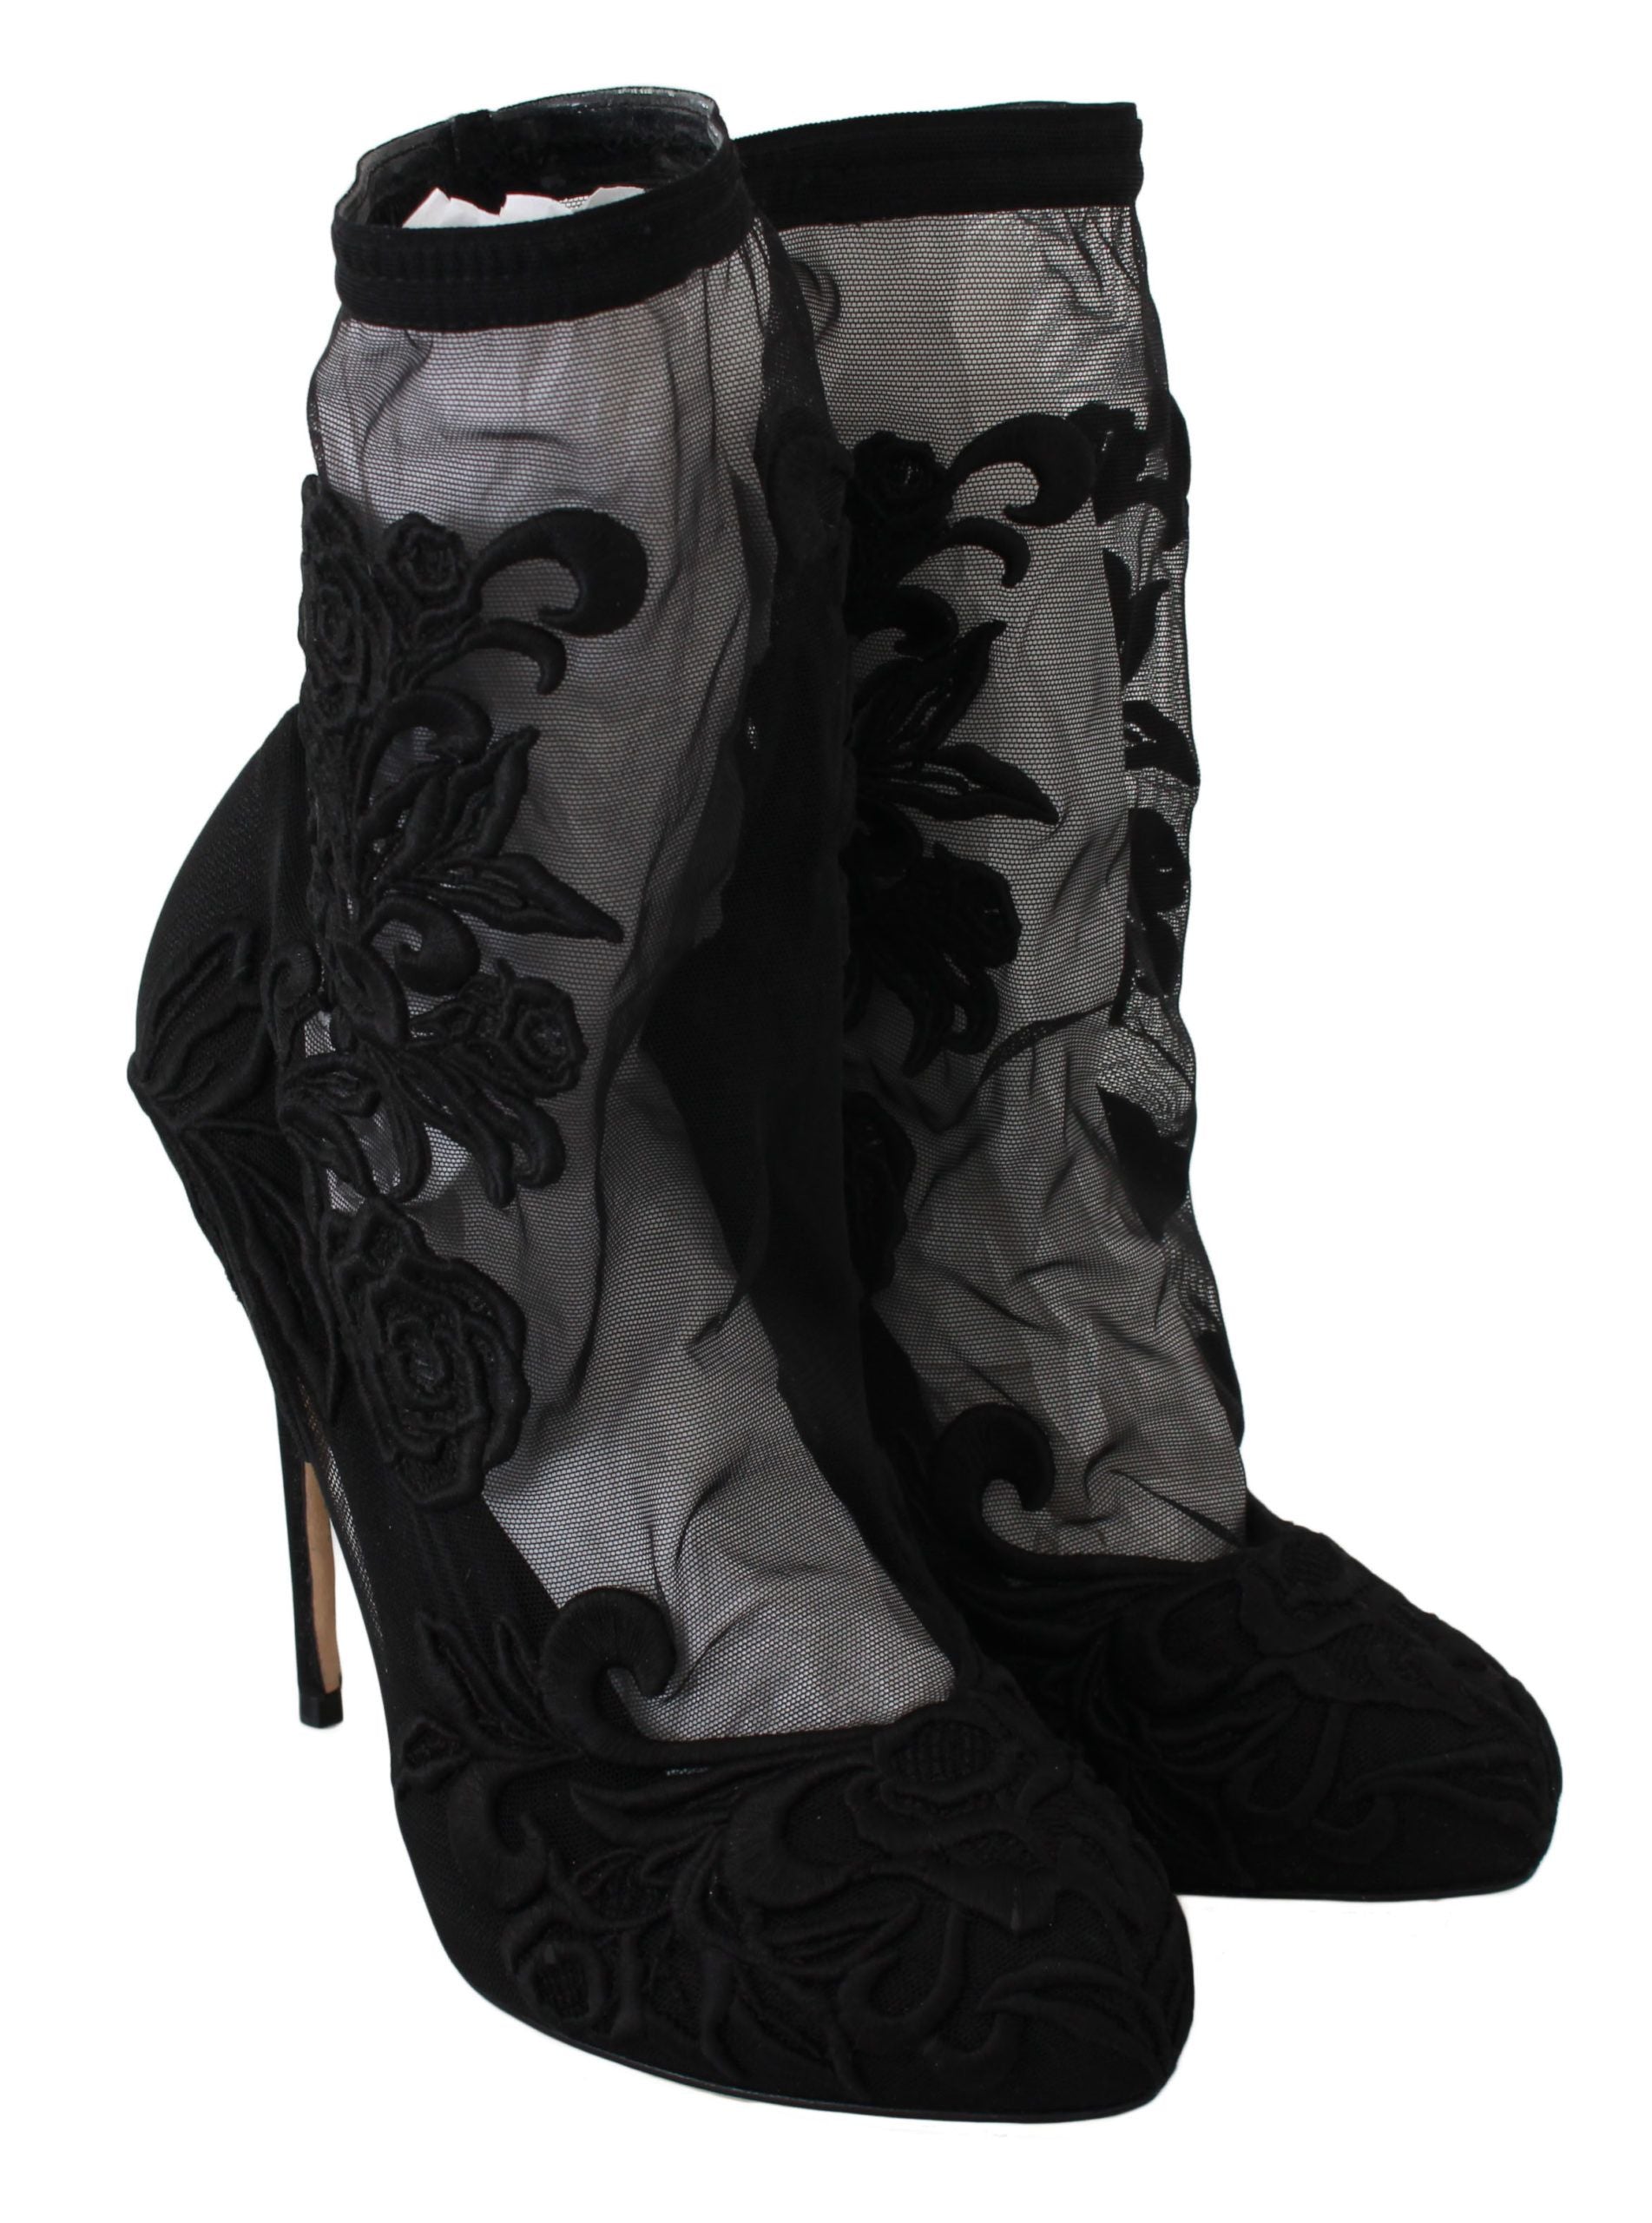 Dolce & Gabbana Black Roses Stilettos Booties Socks Shoes - Designed by Dolce & Gabbana Available to Buy at a Discounted Price on Moon Behind The Hill Online Designer Discount Store